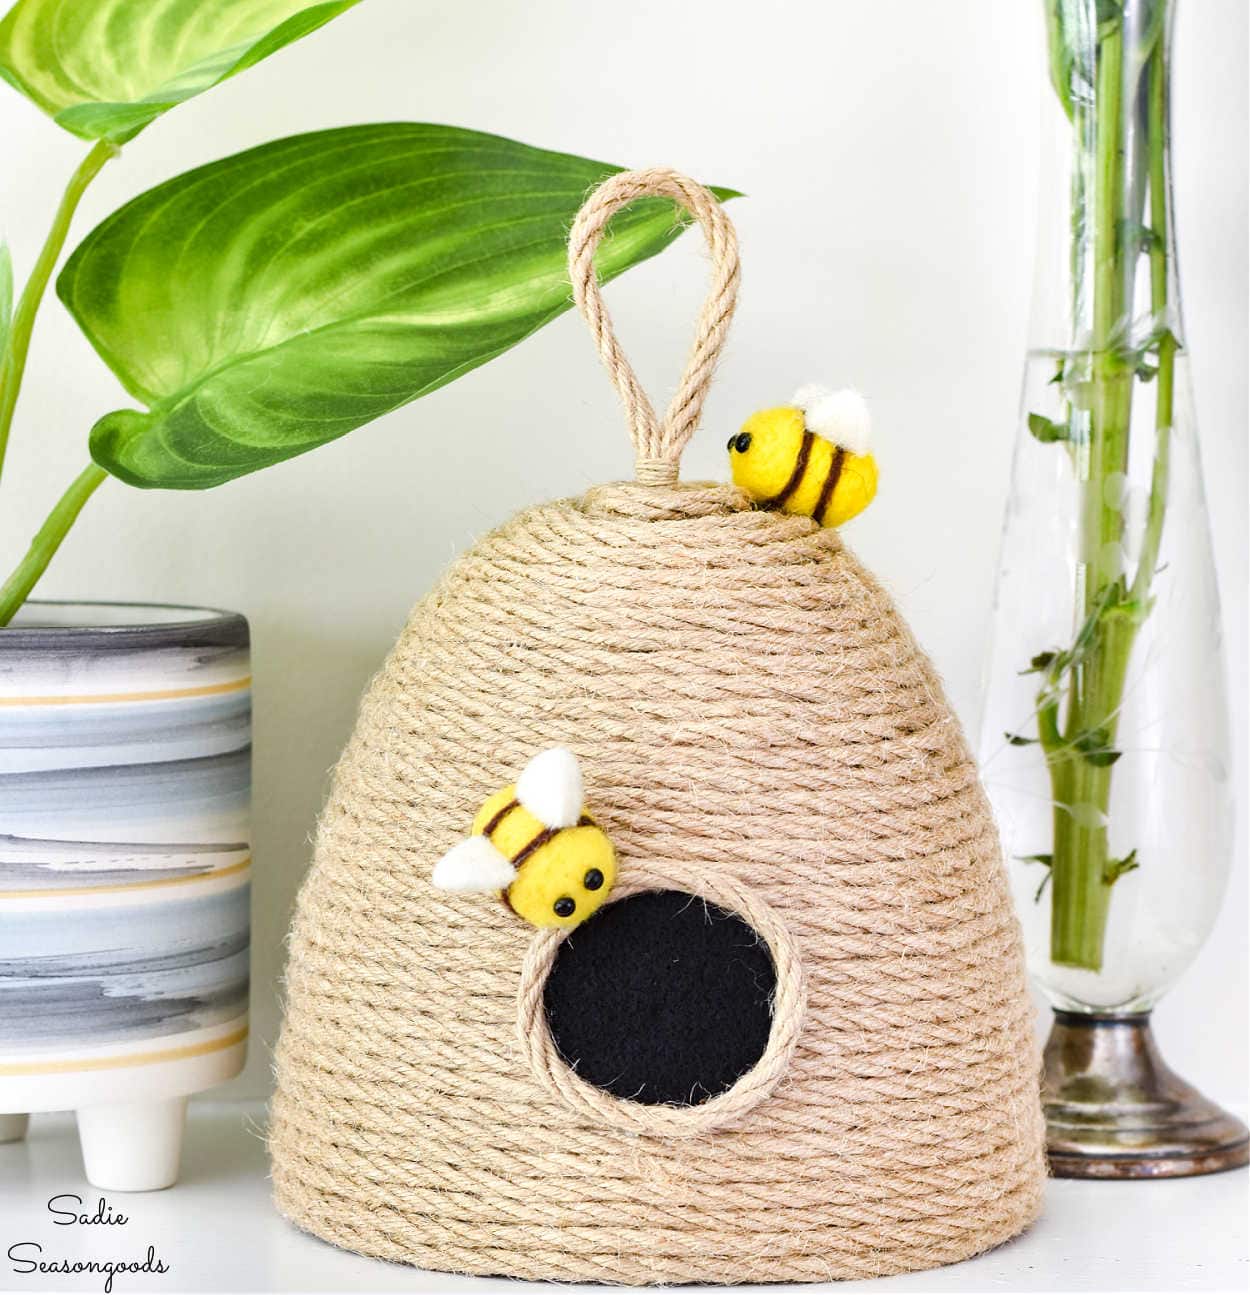 Chic Work SpacesSimplified Bee